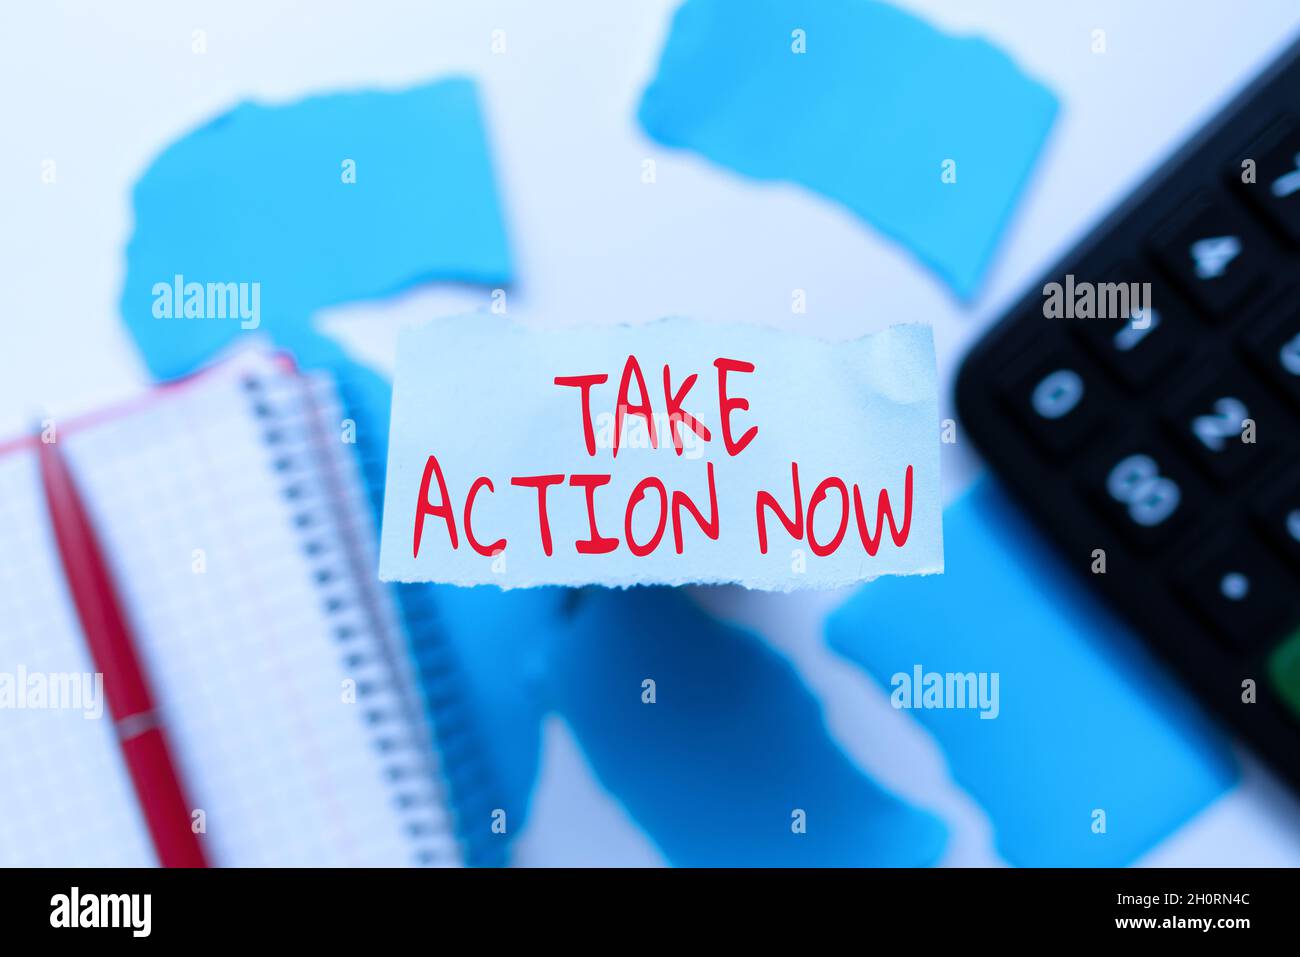 Sign displaying Take Action Now. Business showcase do something official or concerted achieve aim with problem Abstract Focusing On A Single Idea Stock Photo